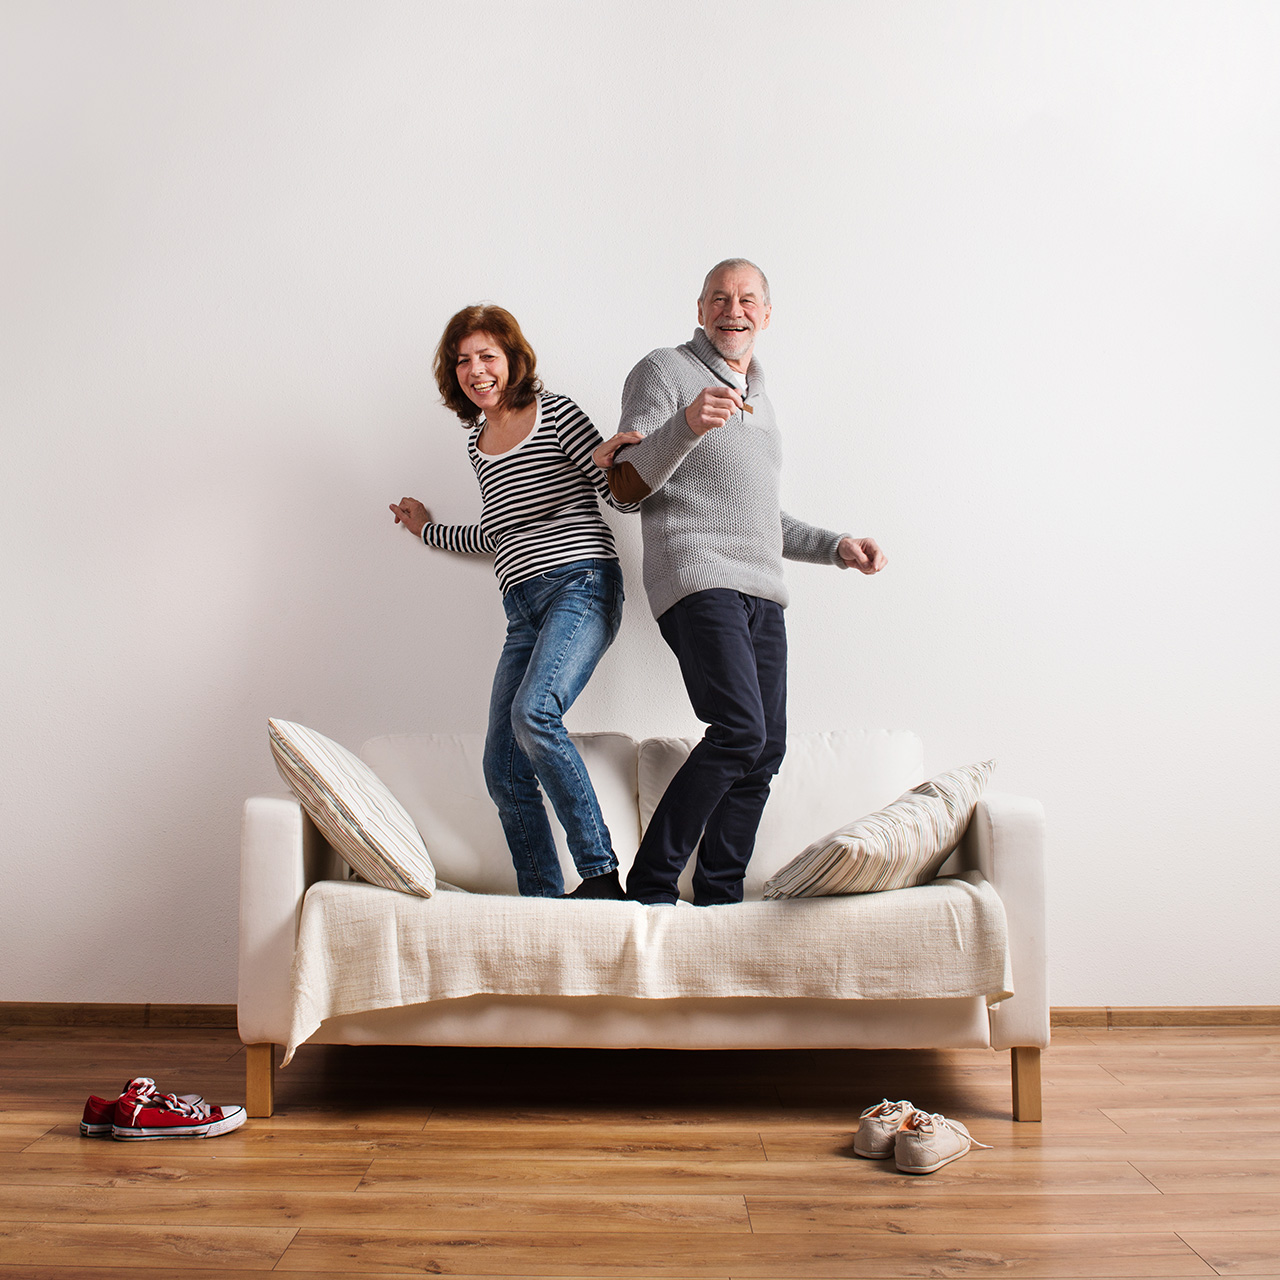 A pain-free couple dances on their couch.